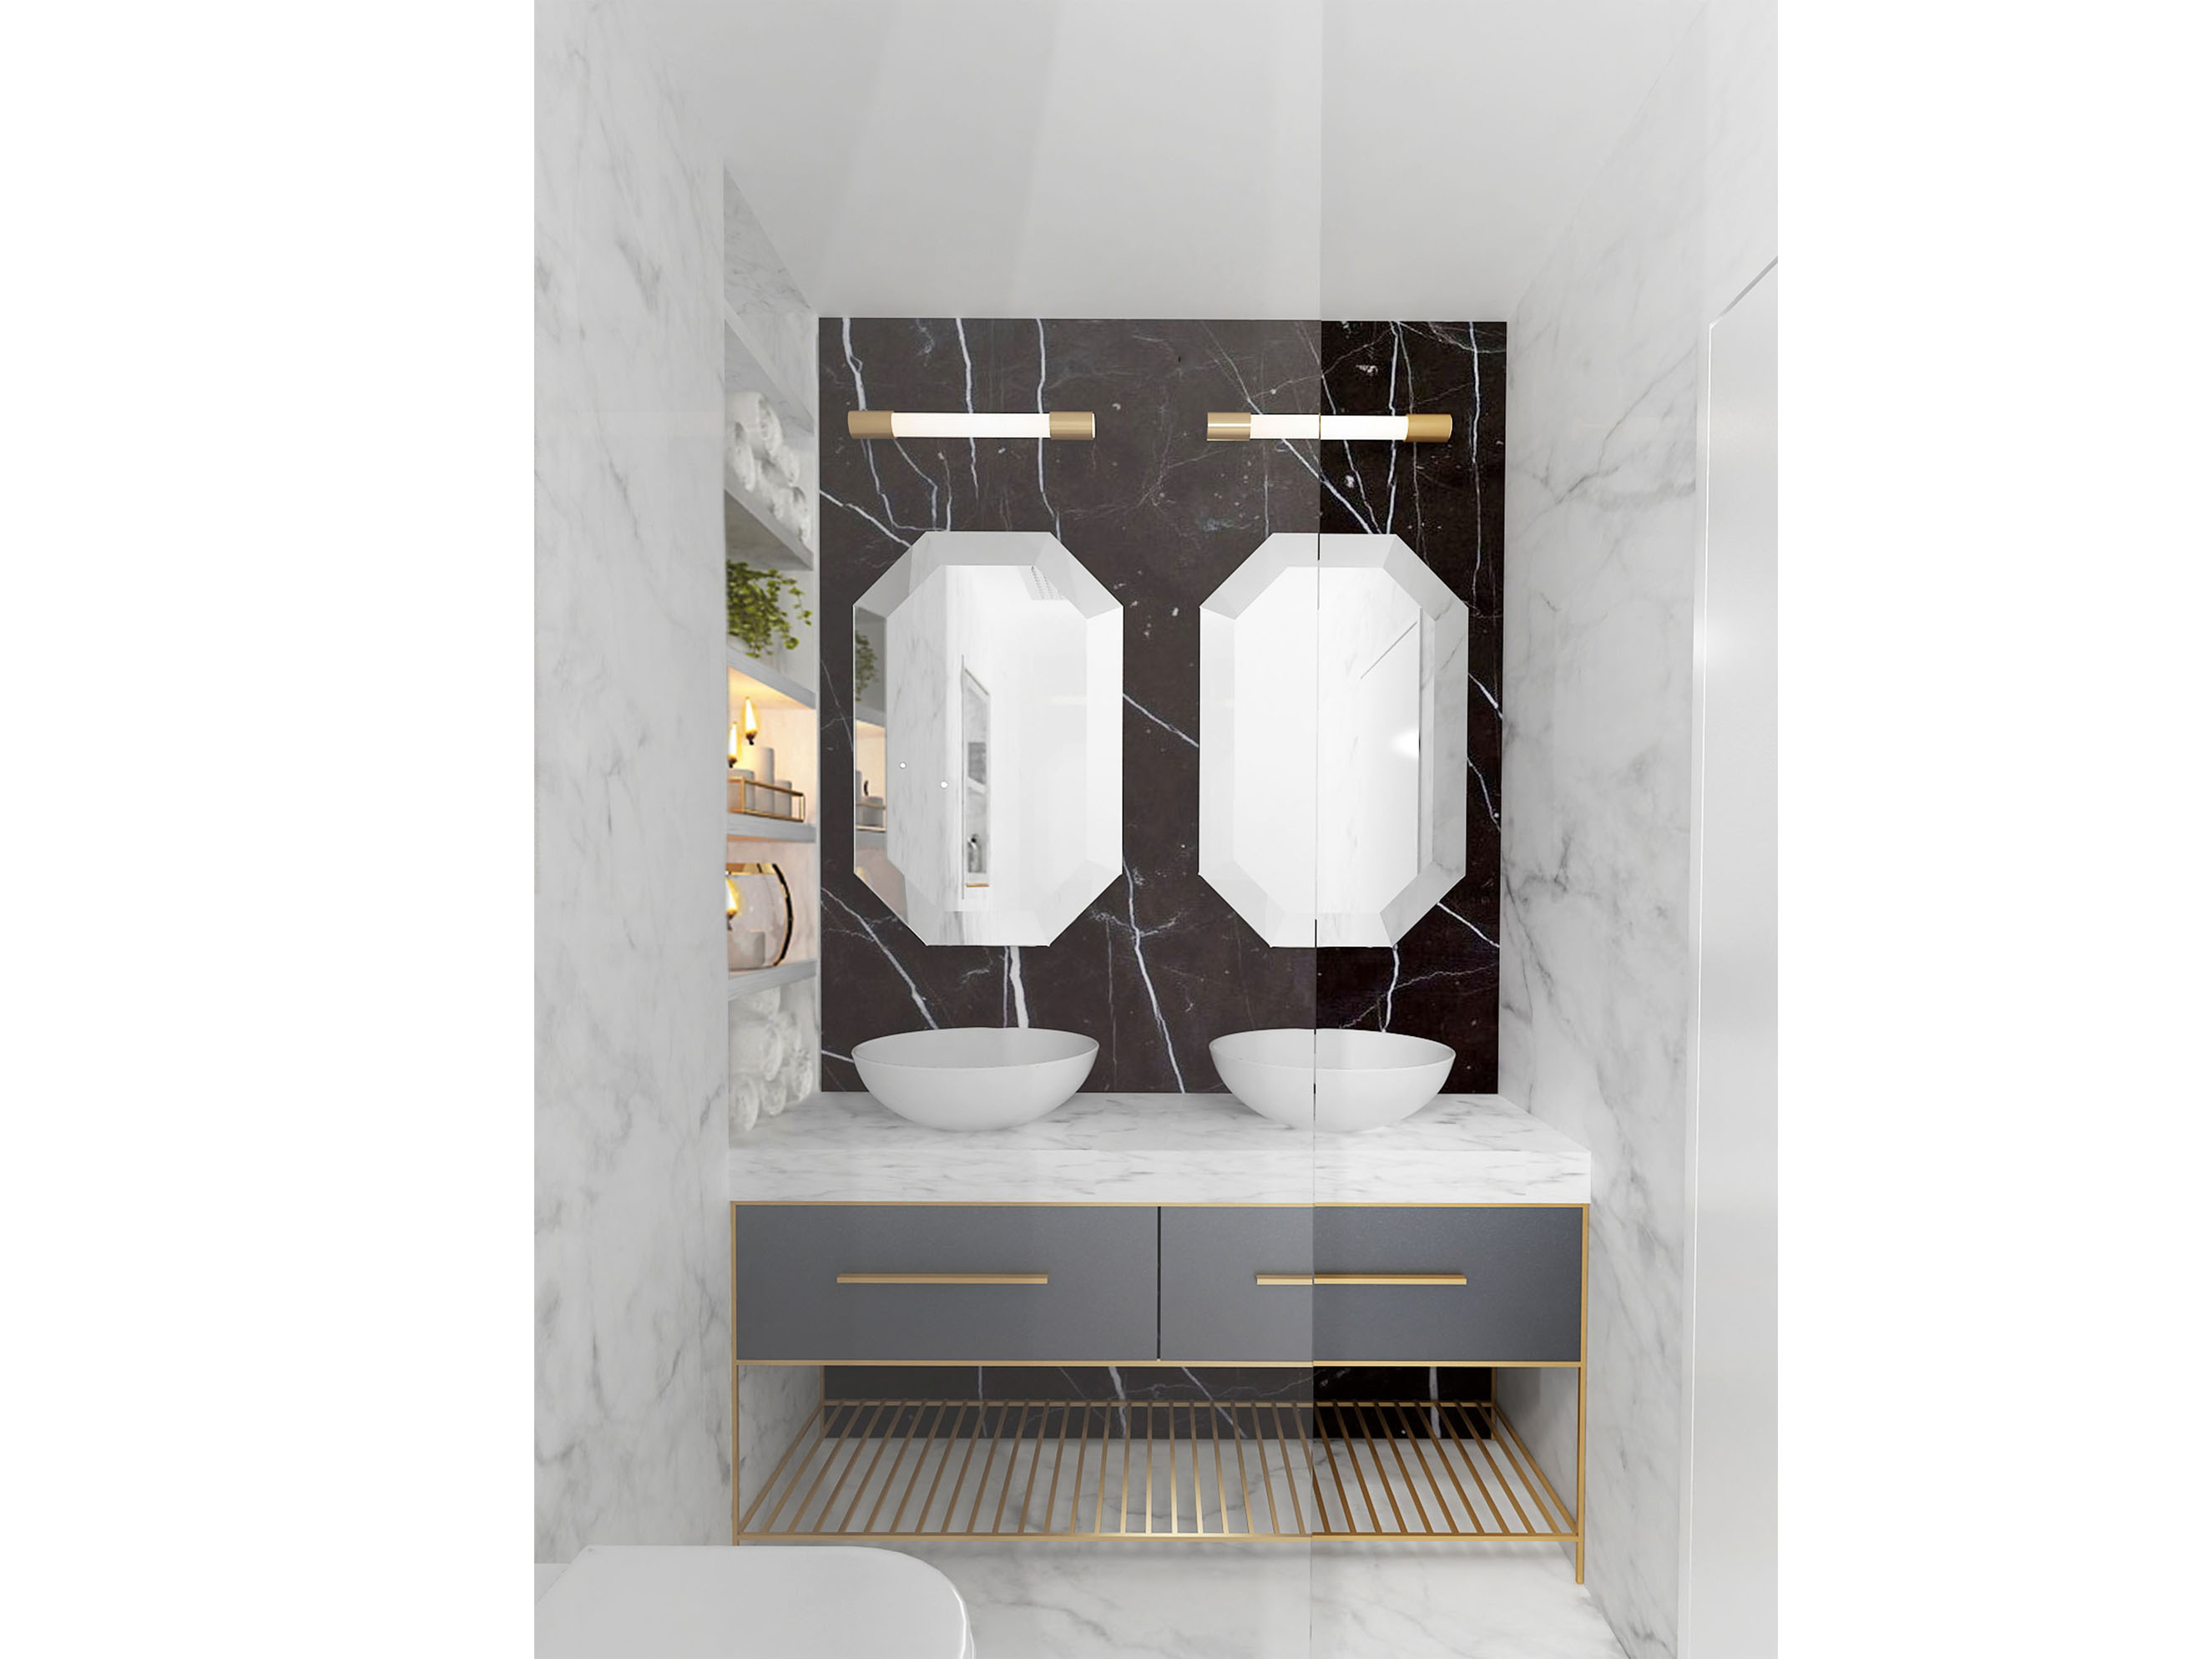 Contemporary master bathroom in black and white marble, hexagon mirrors and a set of bathroom sinks